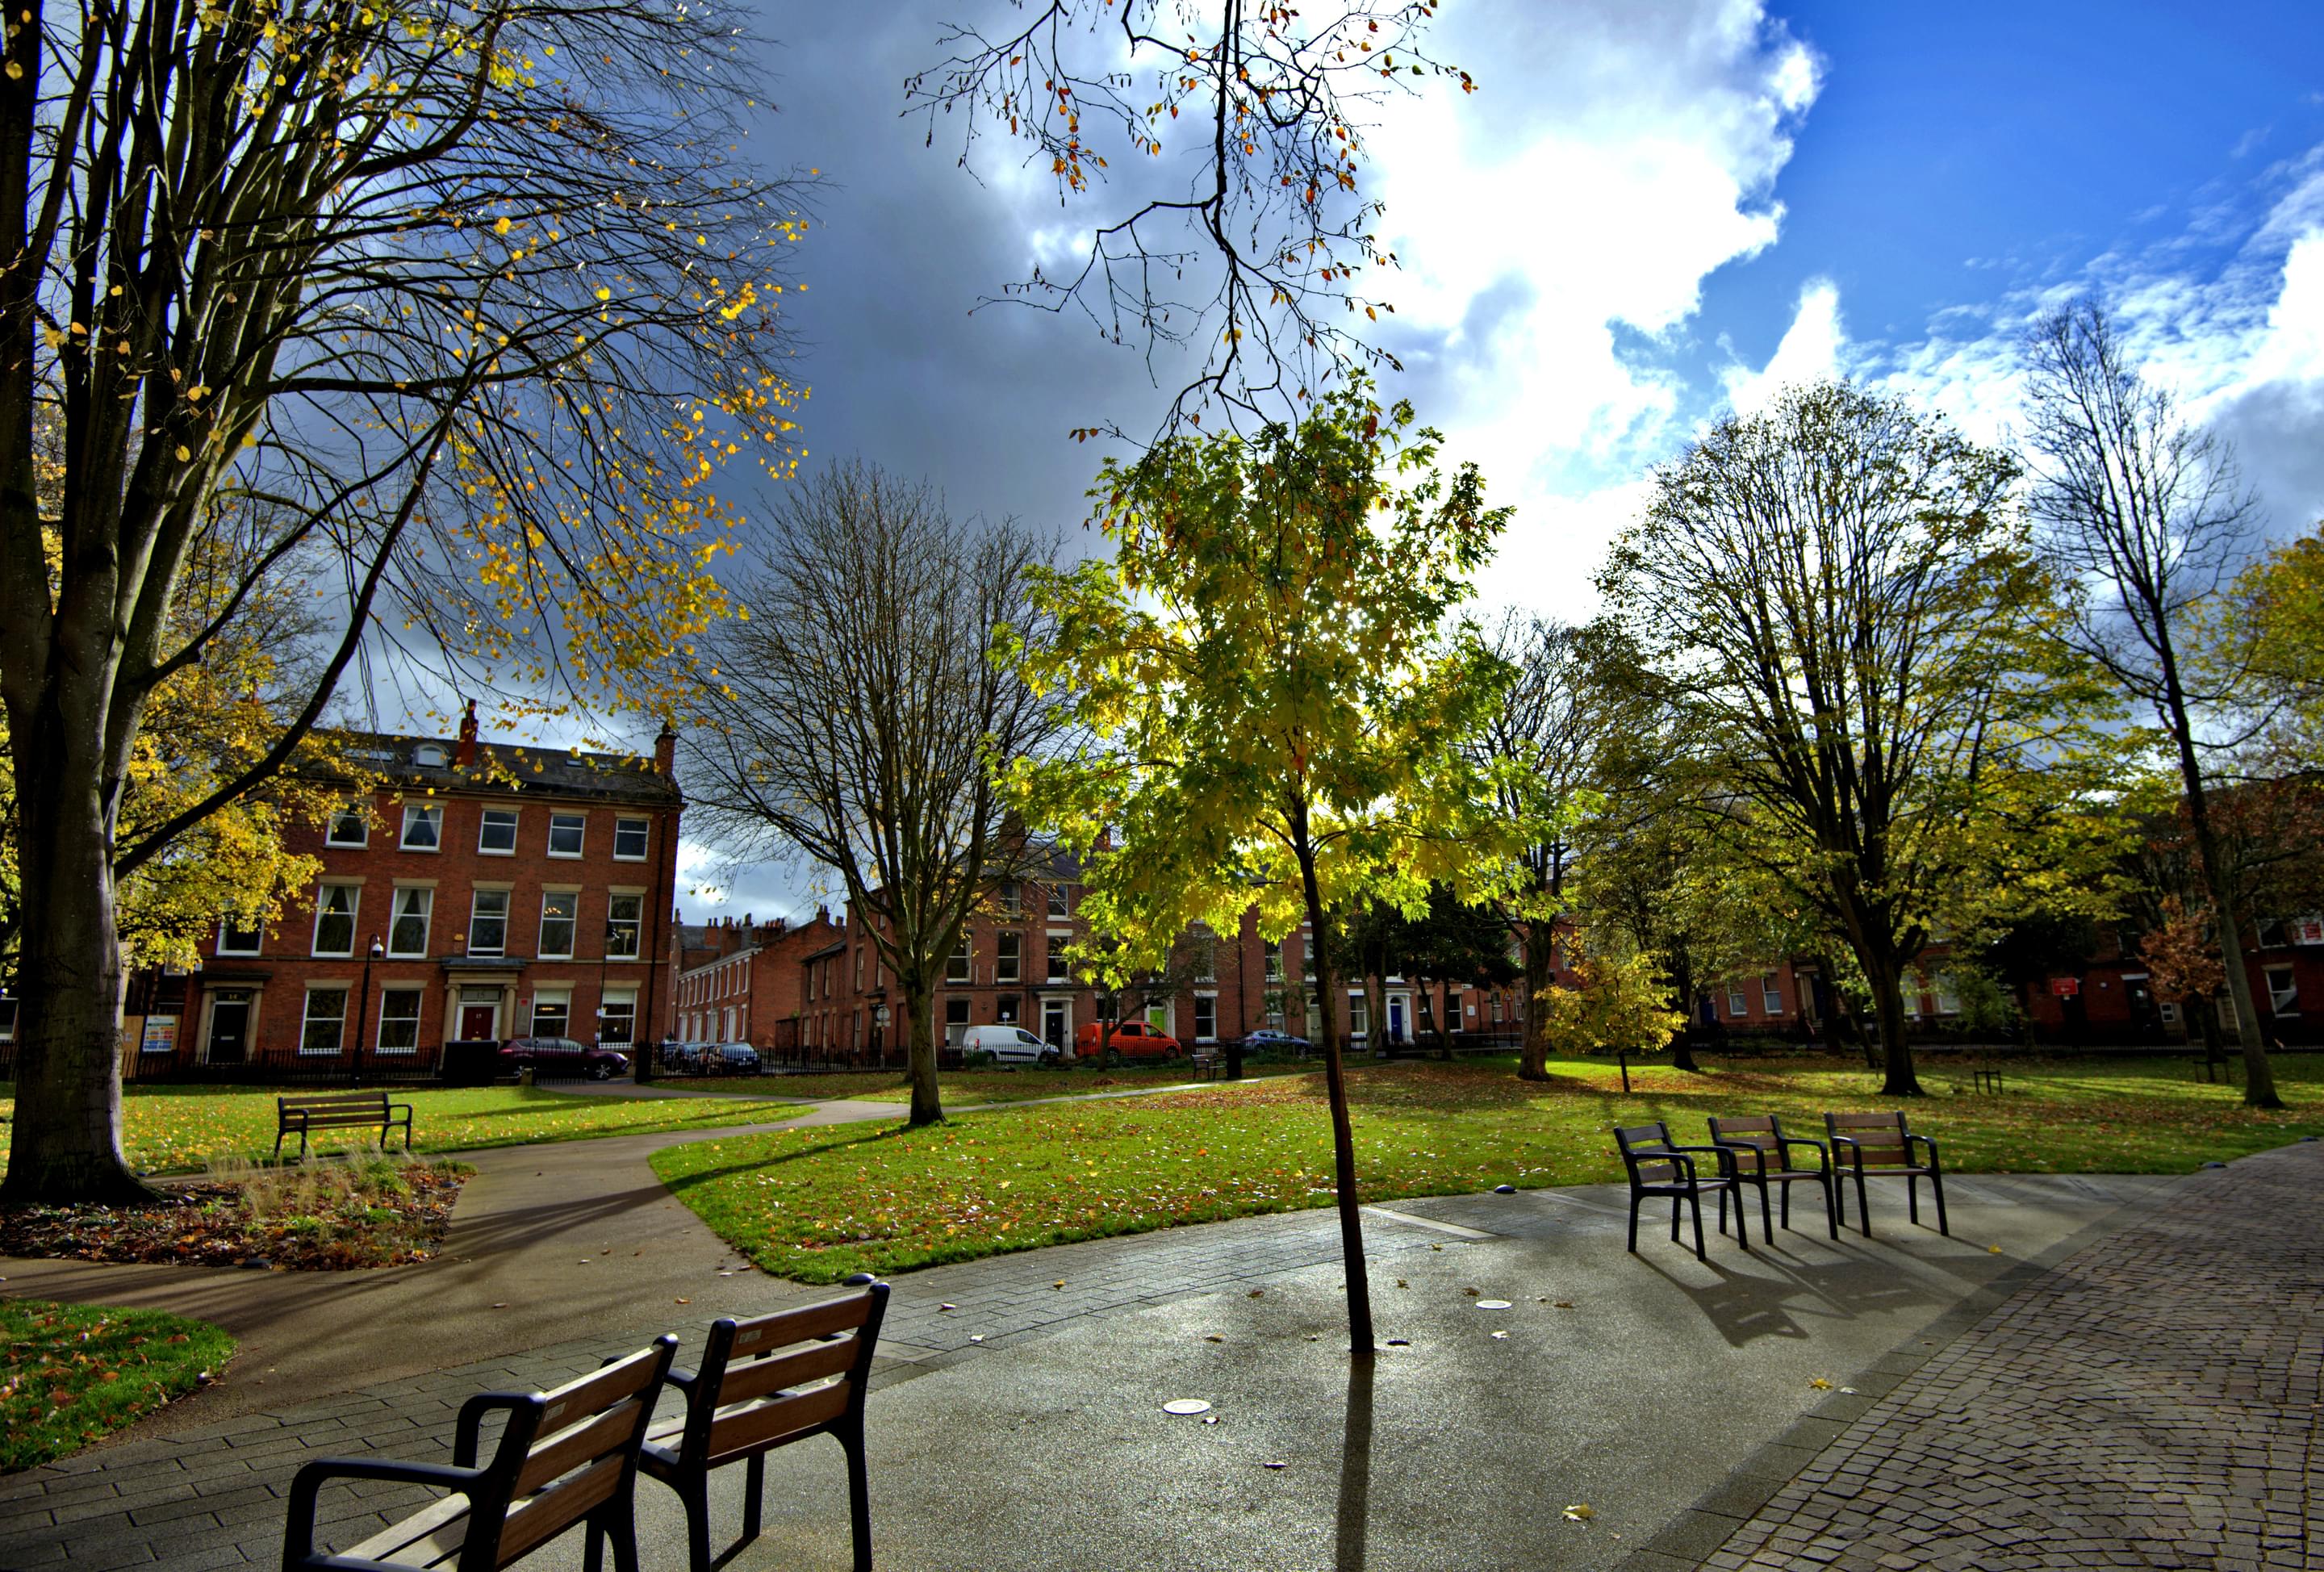 Winckley Square Overview